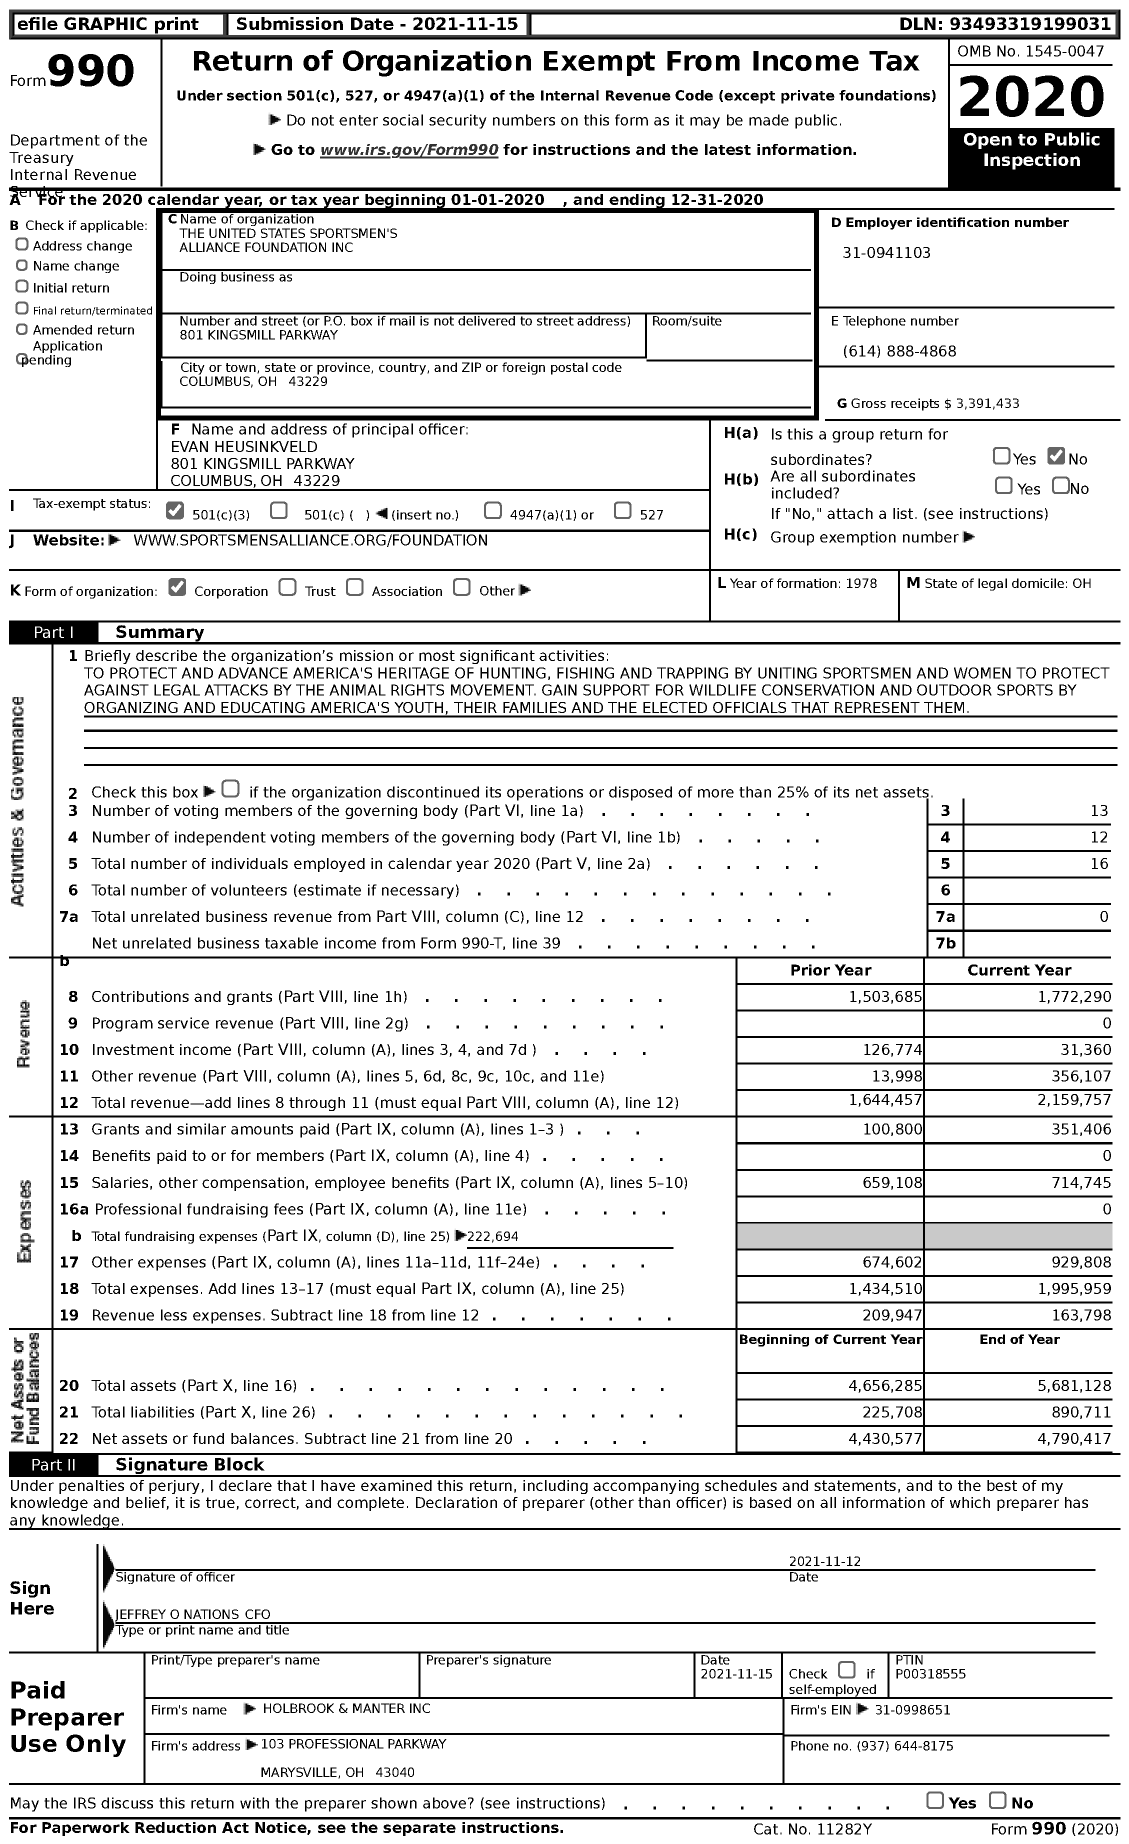 Image of first page of 2020 Form 990 for The United States Sportsmen's Alliance Foundation